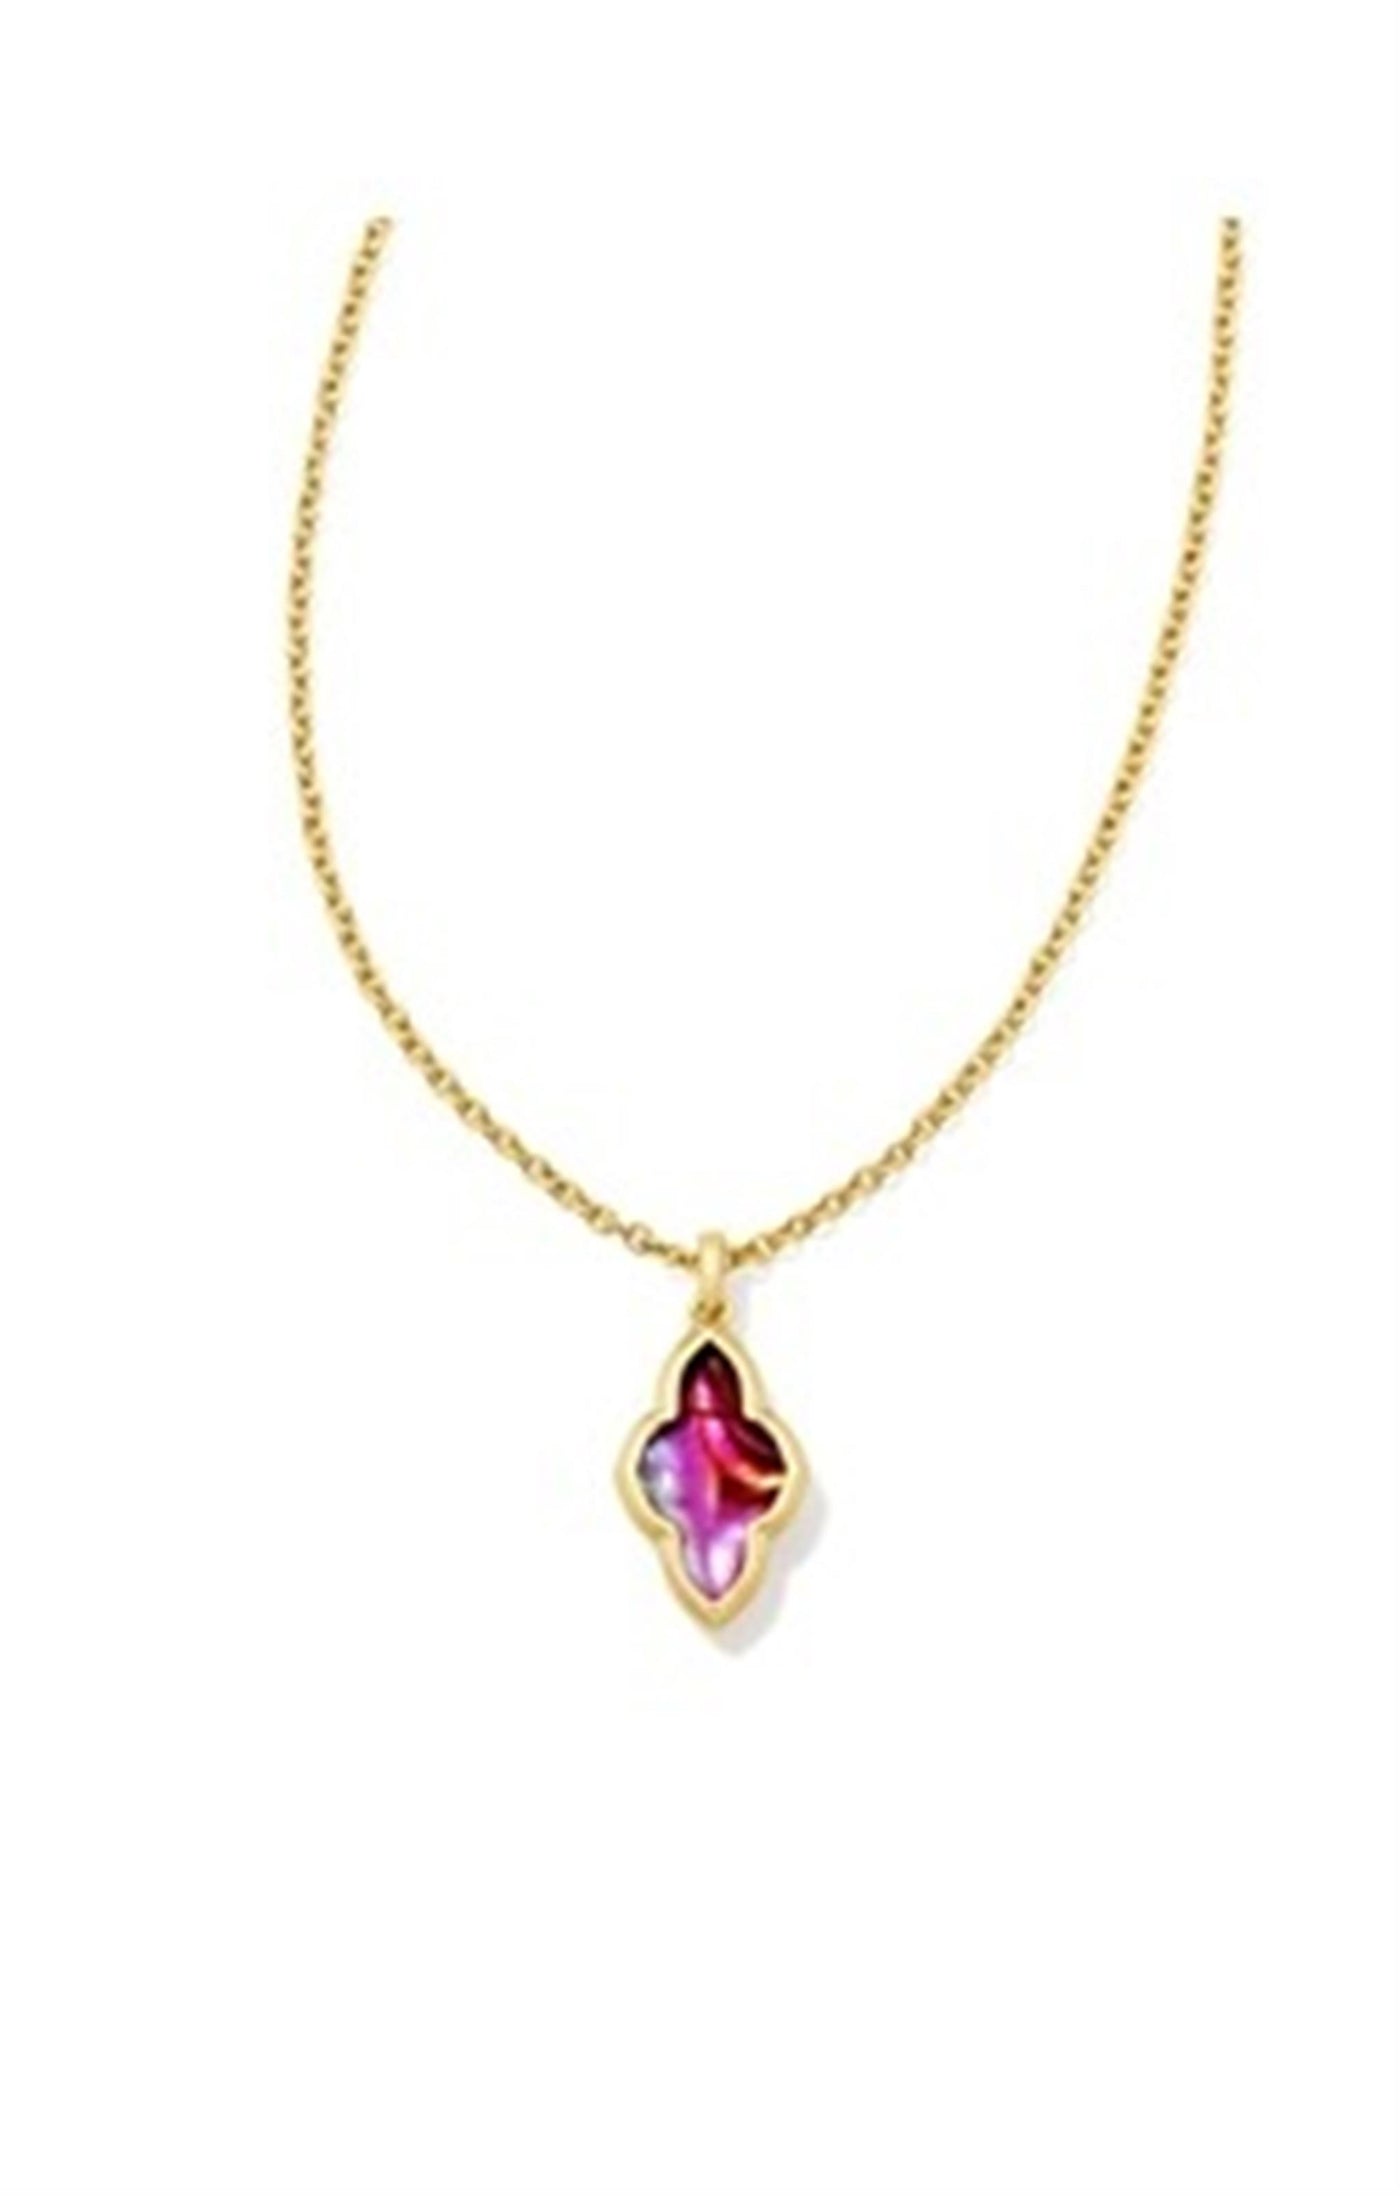 Gold Tone Necklace Featuring Burgundy Illusion by Kendra Scott